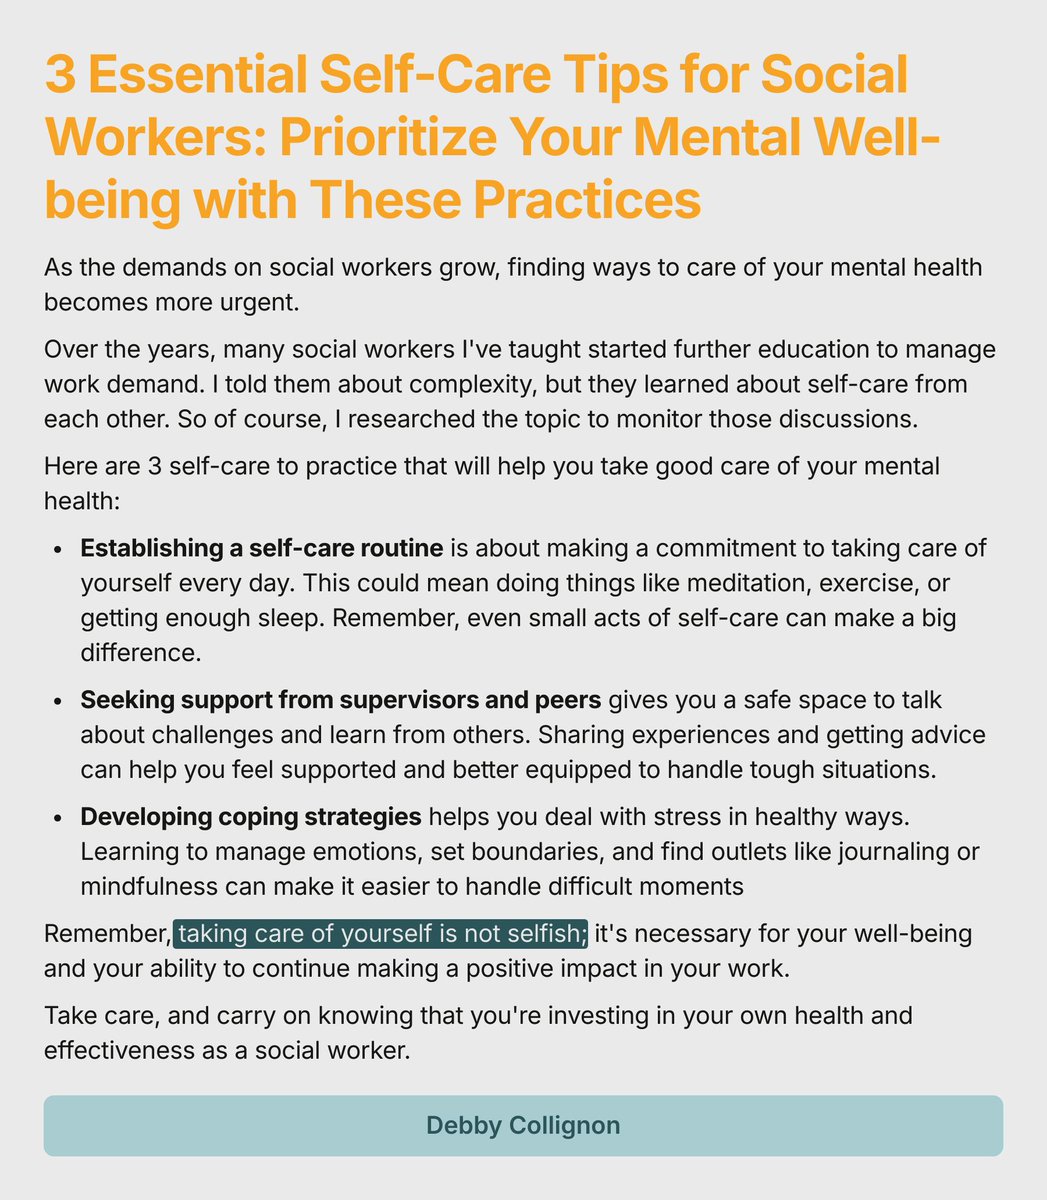 3 Essential Self-Care Tips for Social Workers: Prioritize Your Mental Well-being with These Practices

#SelfCare #SupportiveNetwork #CopingStrategies #SocialWorkSupport #WellnessWednesday #HealthyLiving #PeerSupport #EmotionalWellbeing #StressManagement #Mindfulness